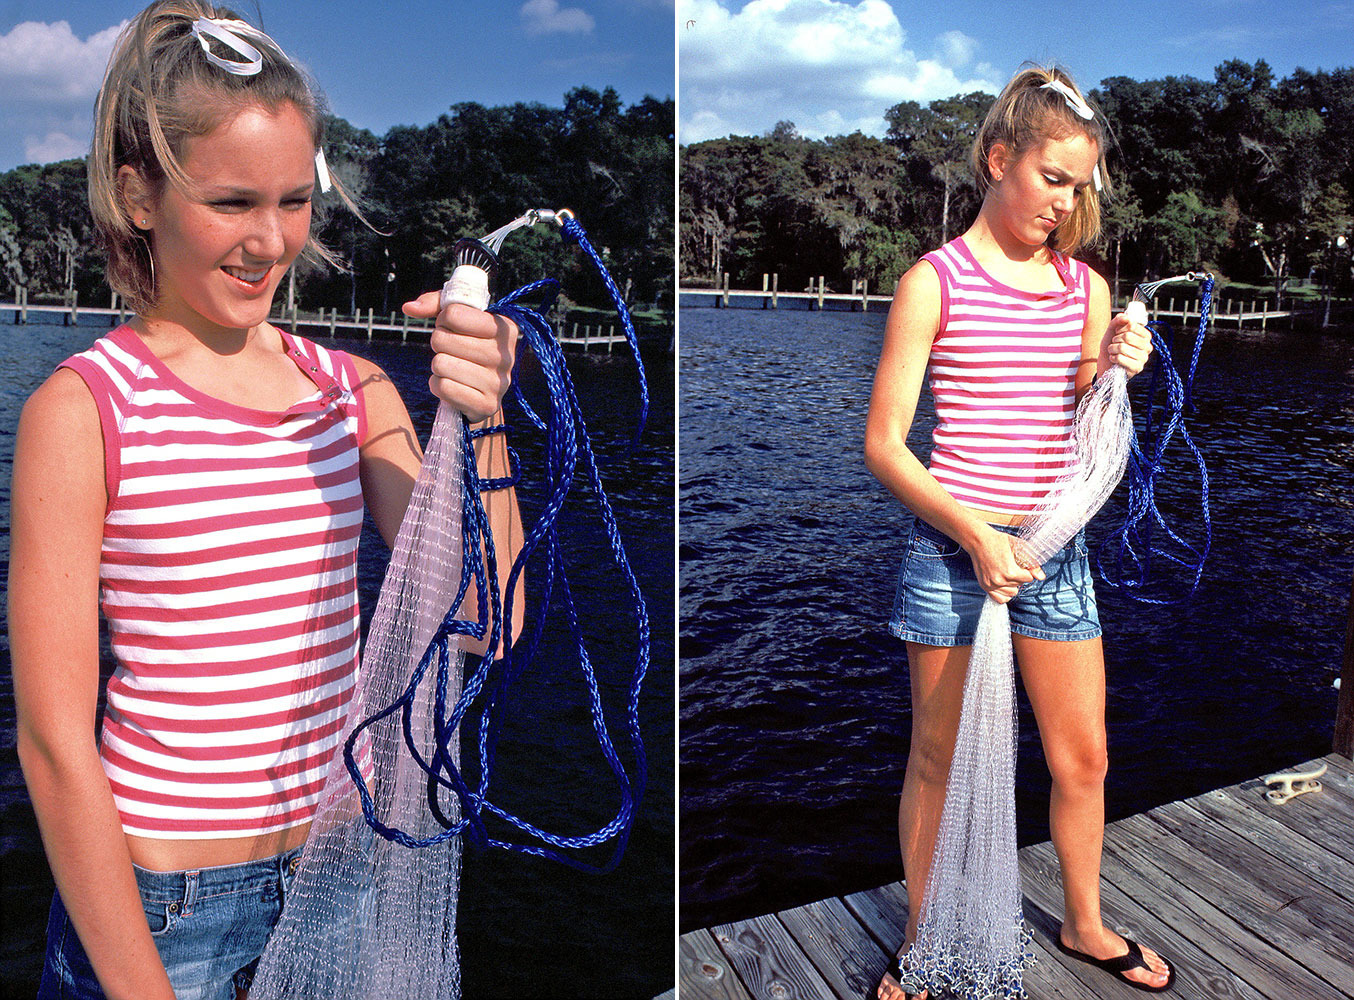 Large Frisbee Cast Nets, Fish Thread Fishing Nets, Hand-Throwing Nets, Used  for Freshwater and Saltwater Shallow Sea Fishing to Catch Shrimps and